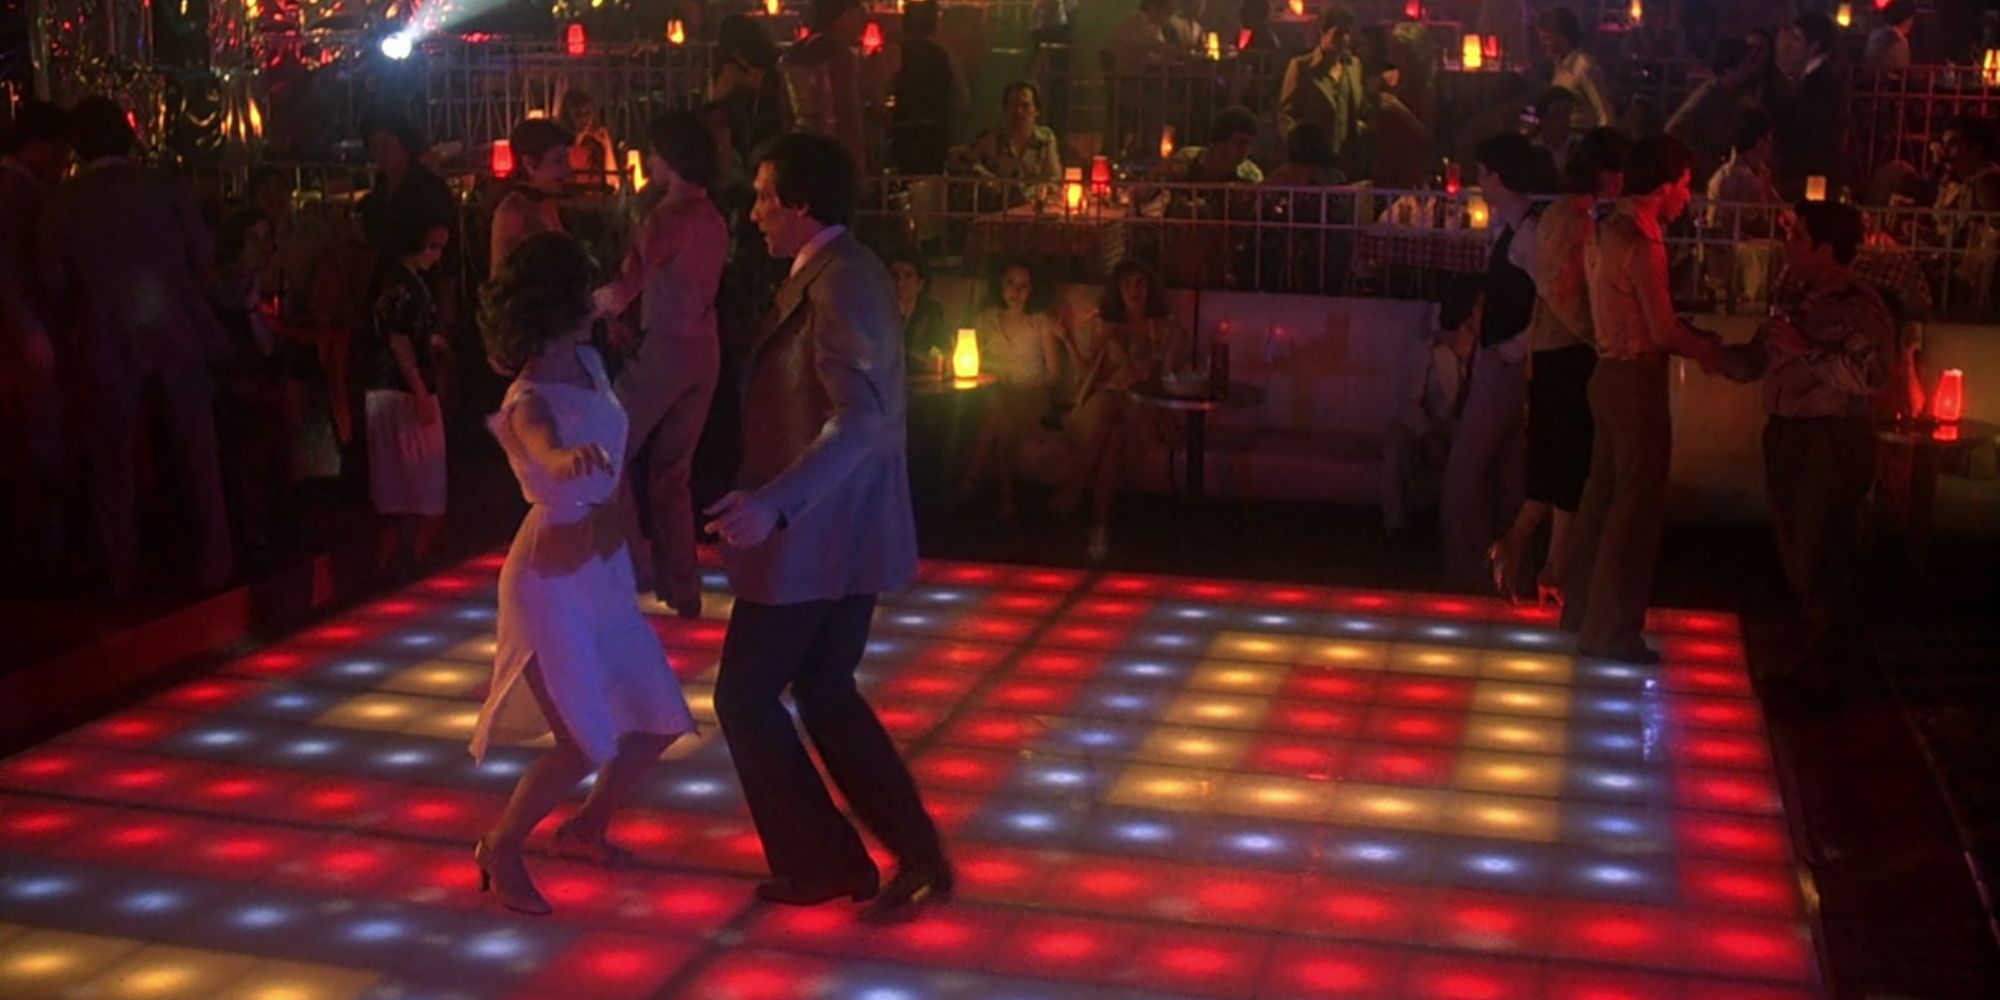 ‘Saturday Night Fever’ and 7 Other Film Soundtracks That Are as Iconic as the Movies They’re From